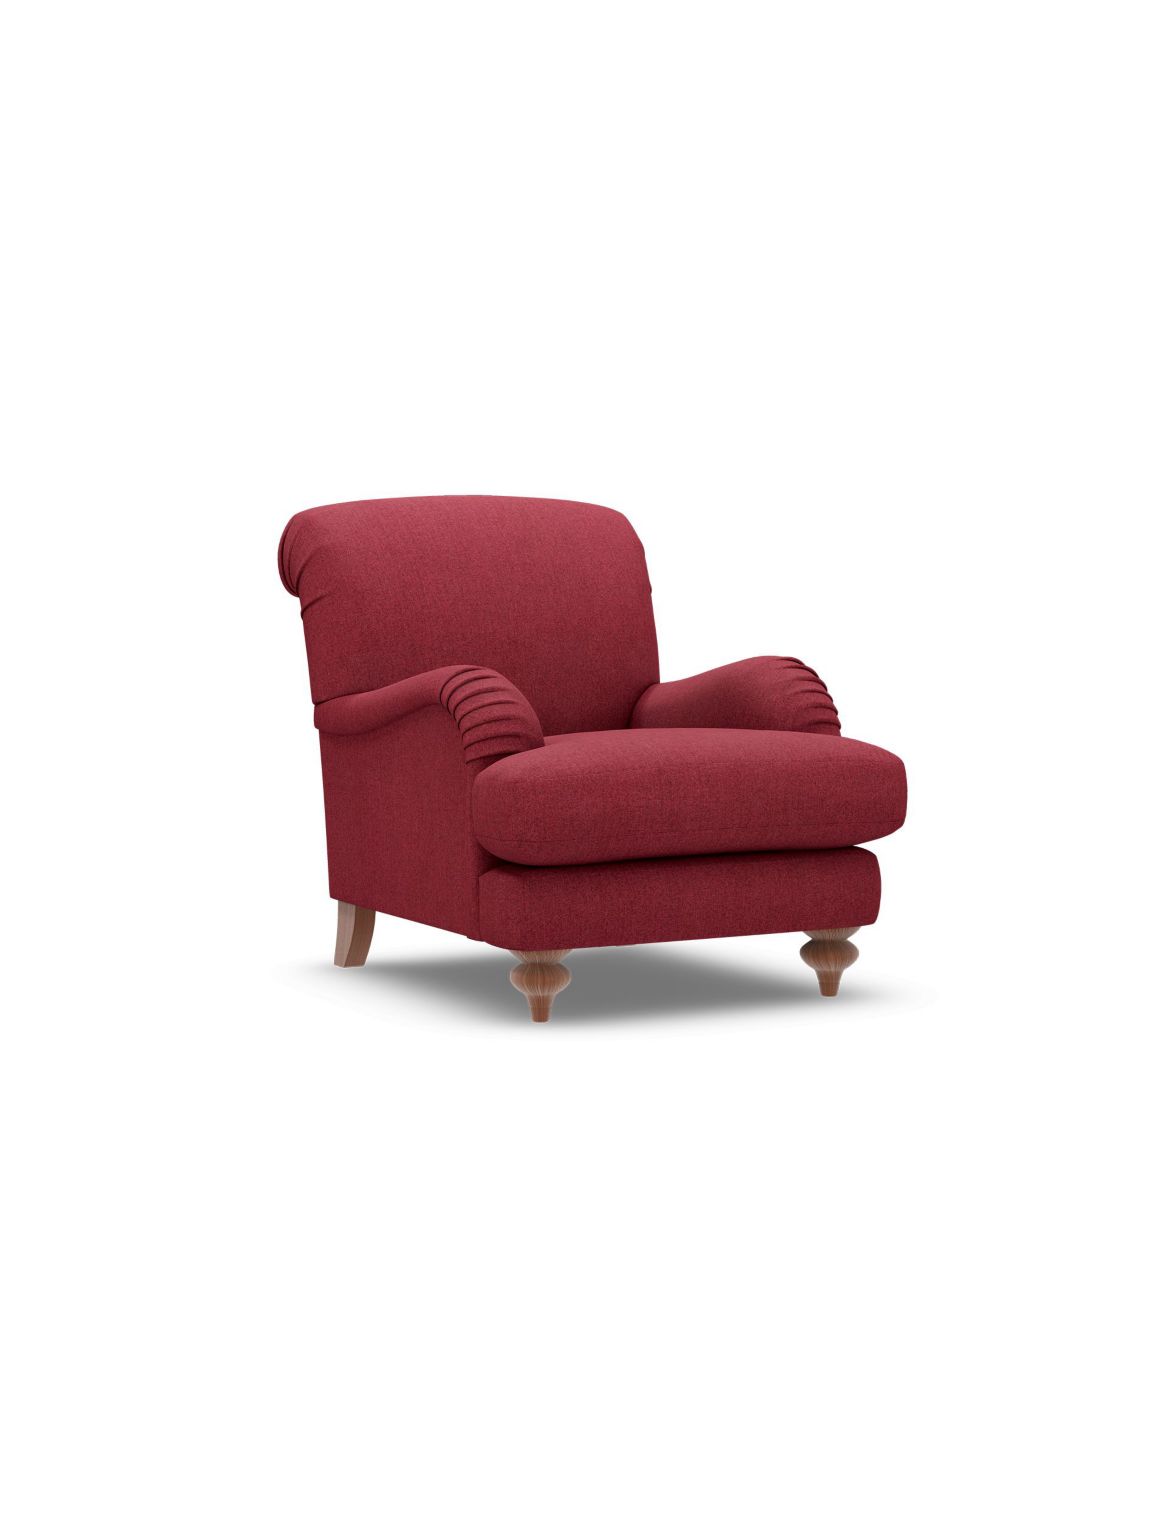 Isabelle Armchair red